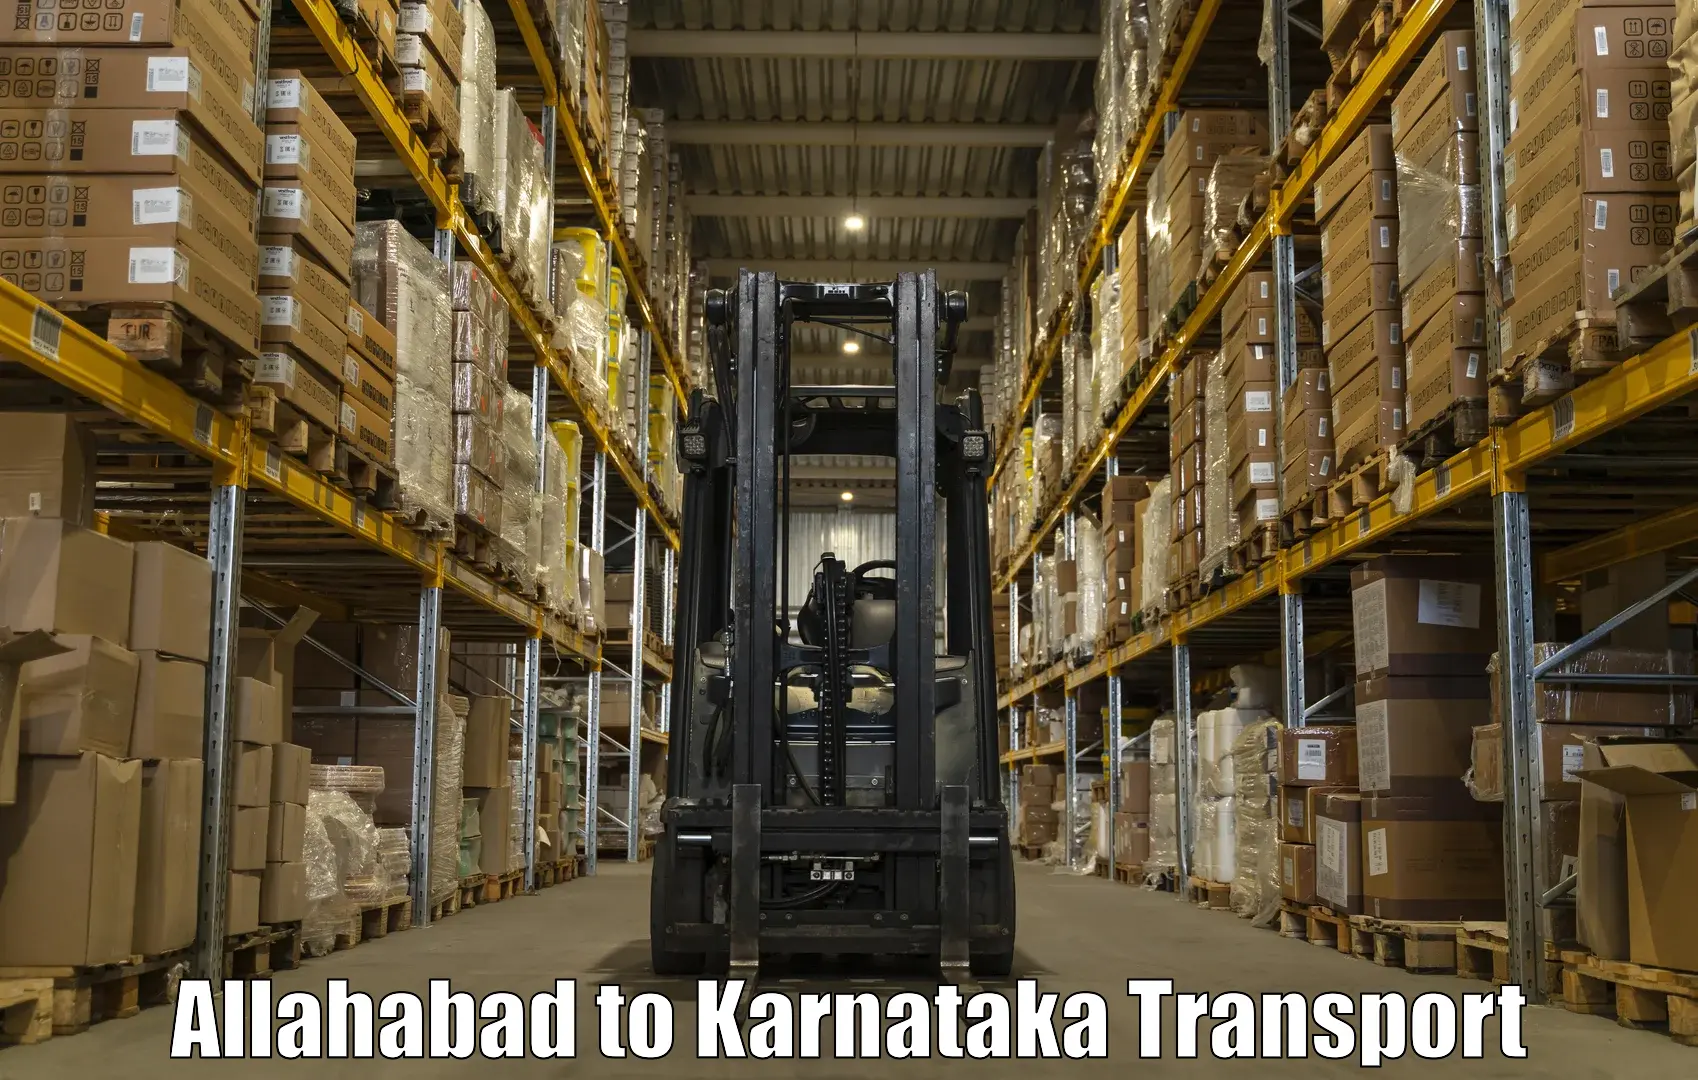 Truck transport companies in India Allahabad to Indian Institute of Science Bangalore